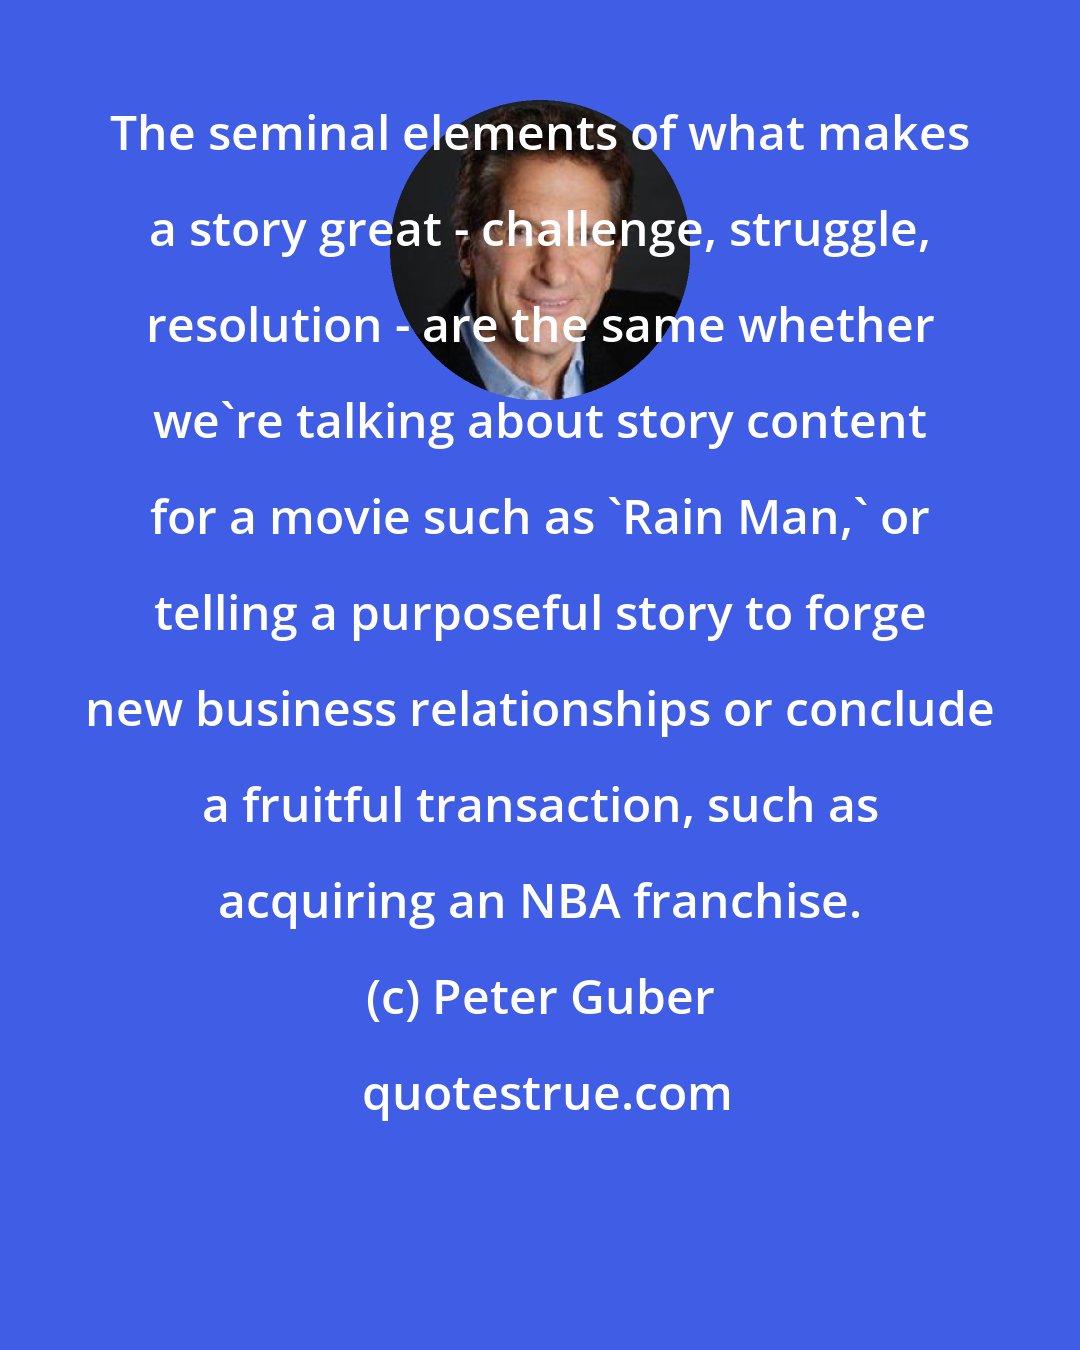 Peter Guber: The seminal elements of what makes a story great - challenge, struggle, resolution - are the same whether we're talking about story content for a movie such as 'Rain Man,' or telling a purposeful story to forge new business relationships or conclude a fruitful transaction, such as acquiring an NBA franchise.